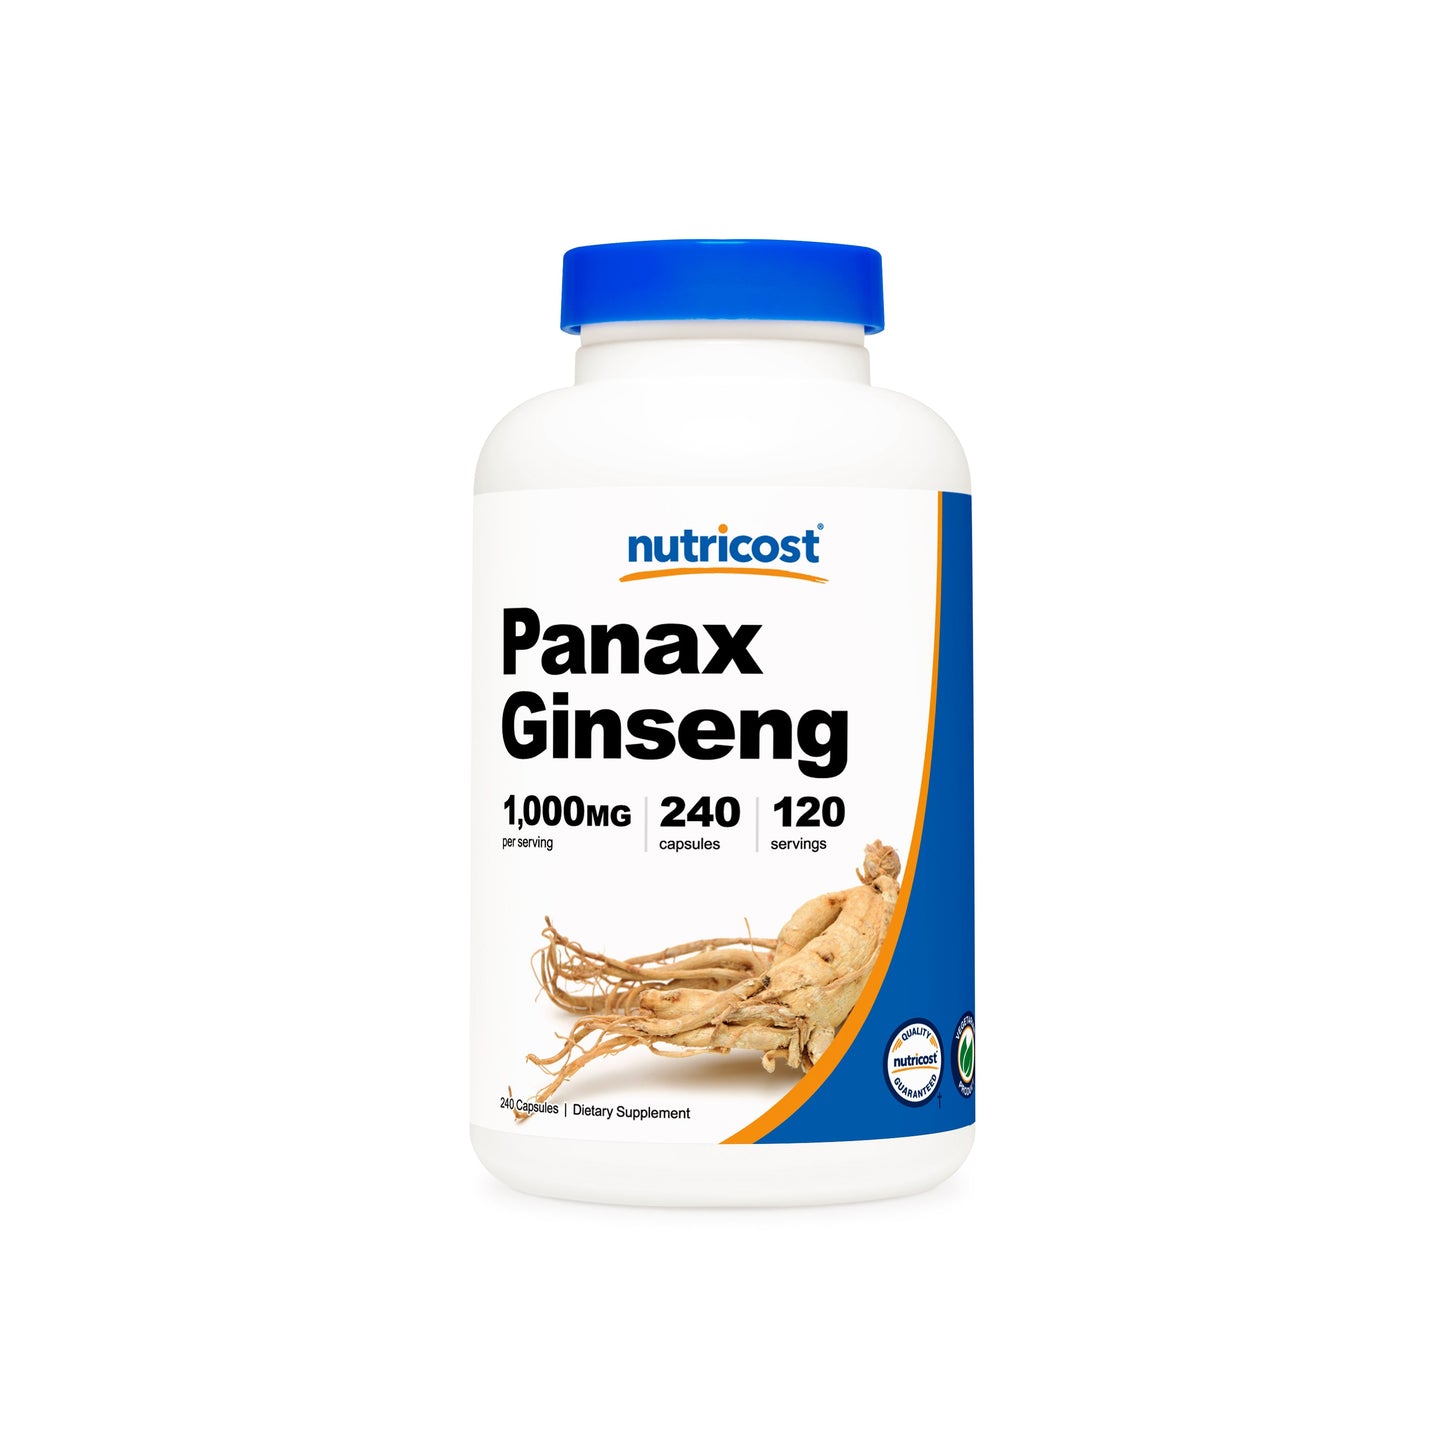 Nutricost Panax Ginseng Capsules